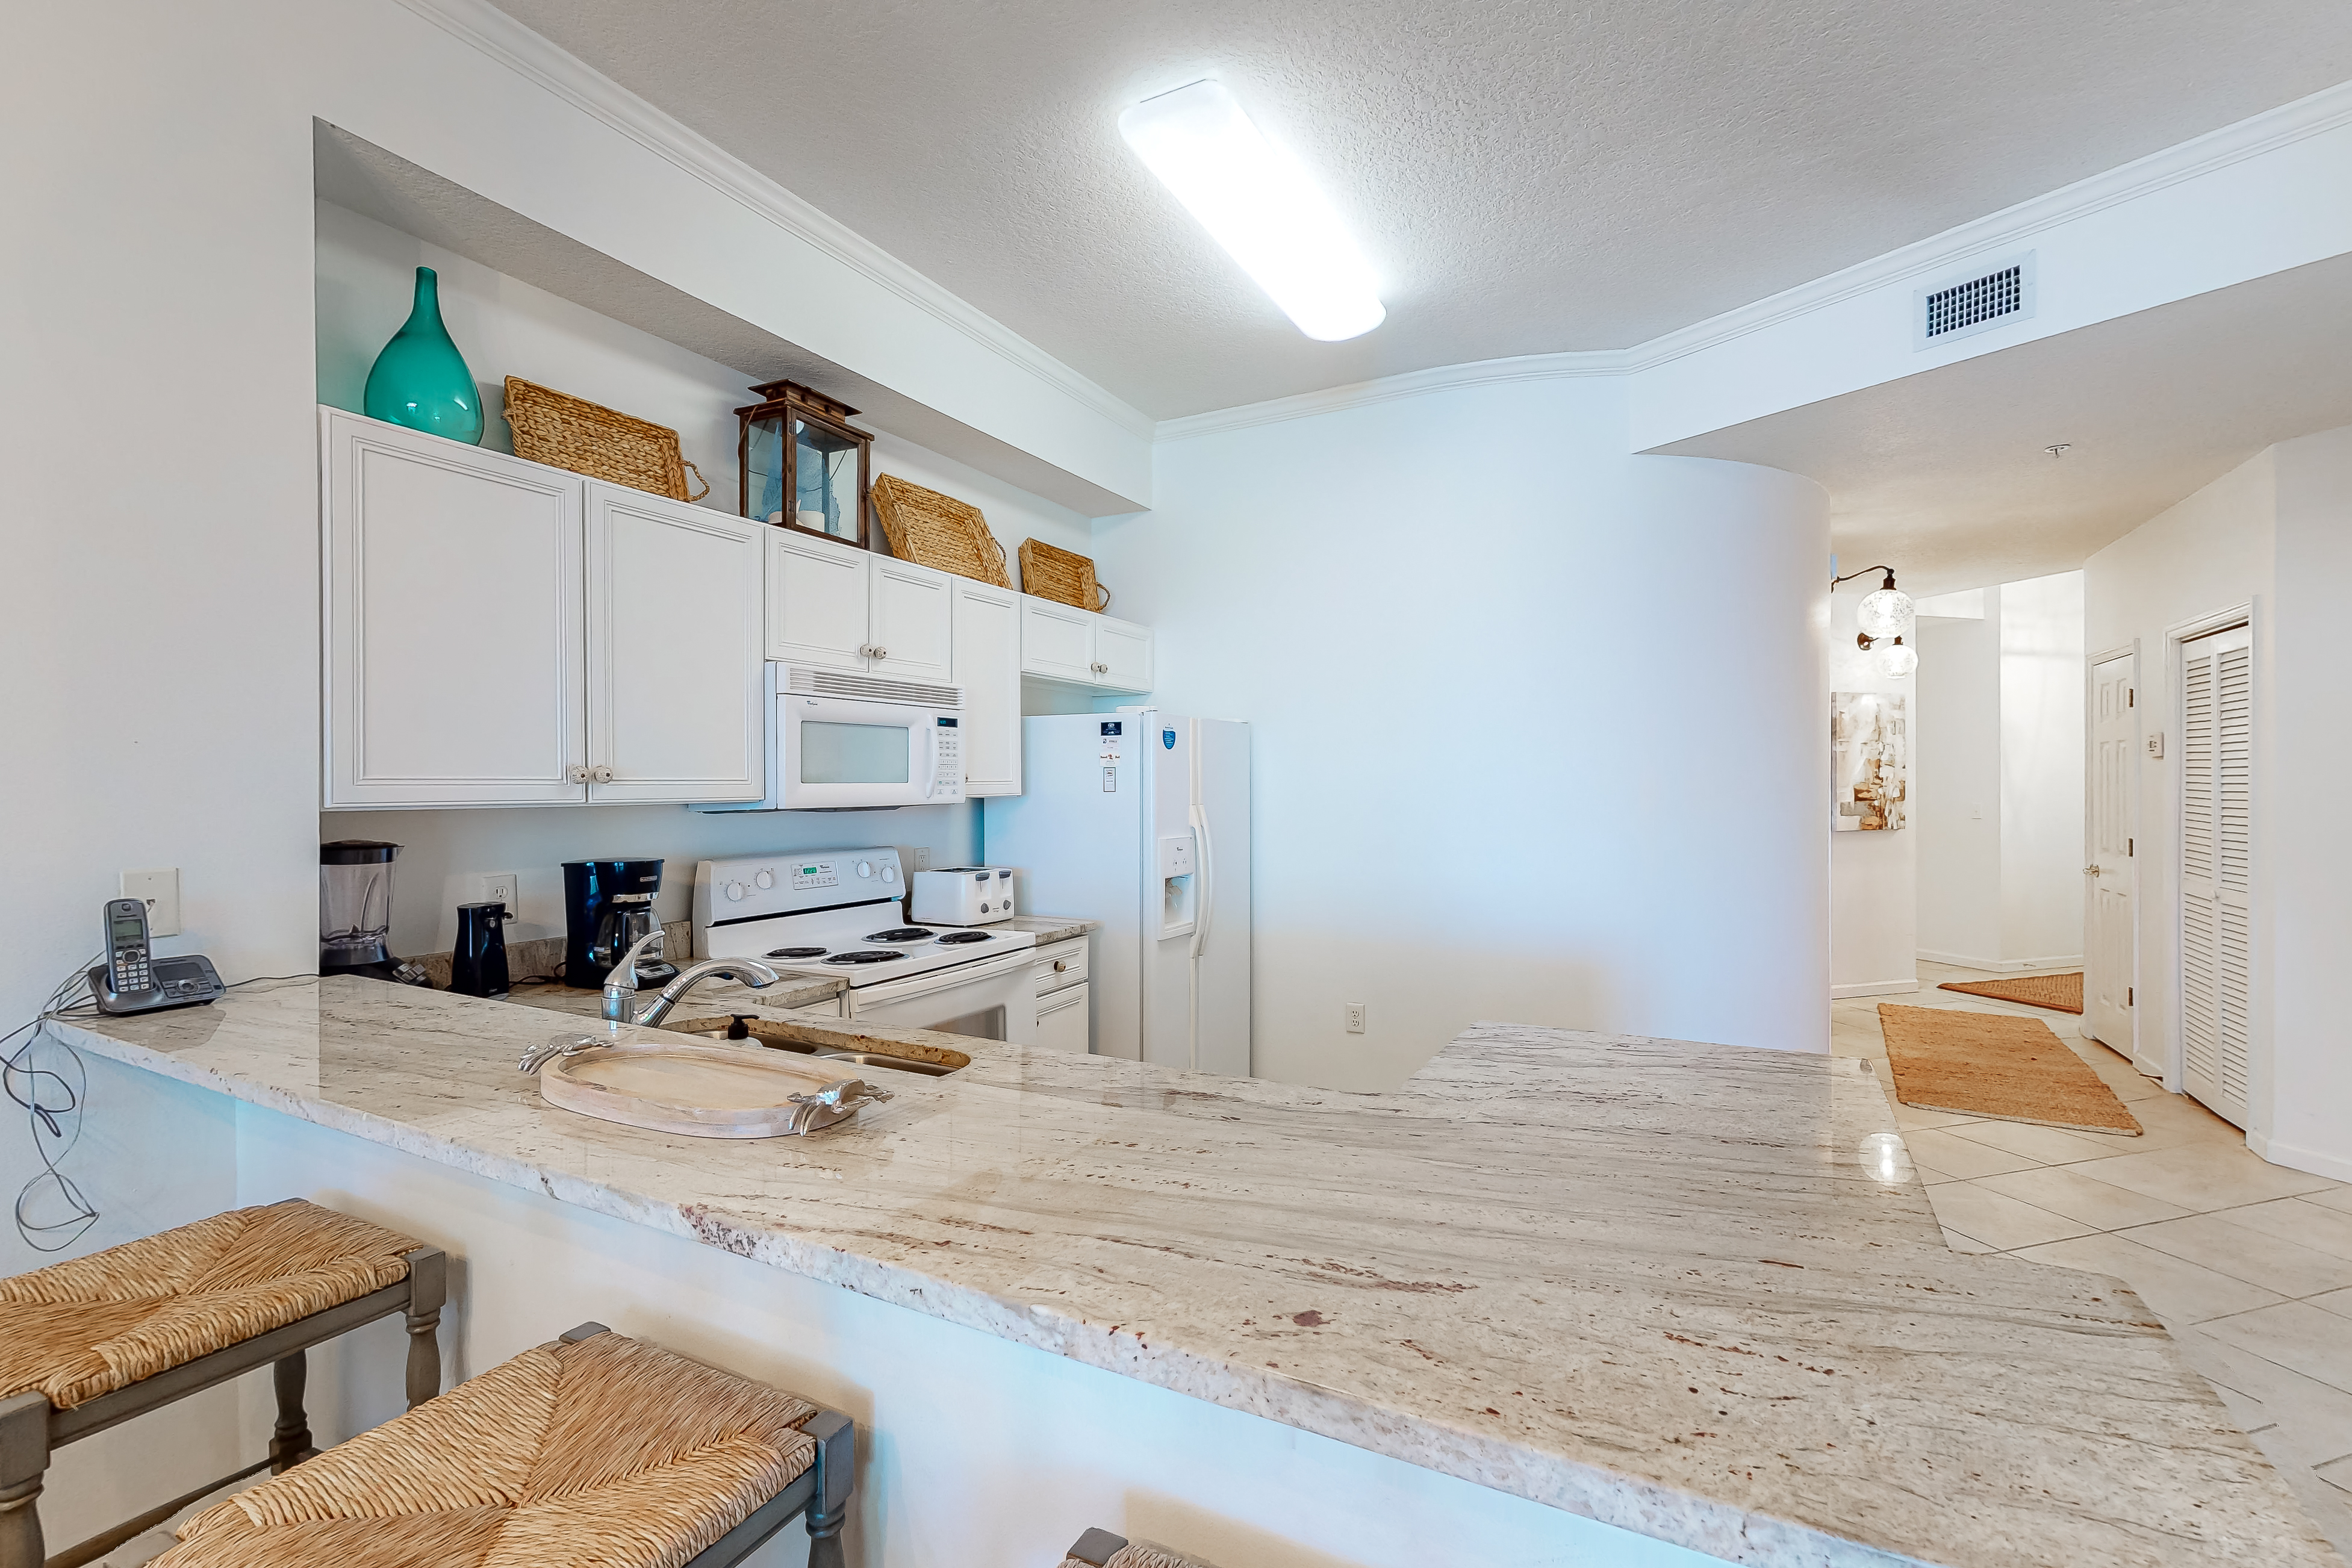 Dunes of Seagrove A404 Condo rental in Dunes of Seagrove in Highway 30-A Florida - #5